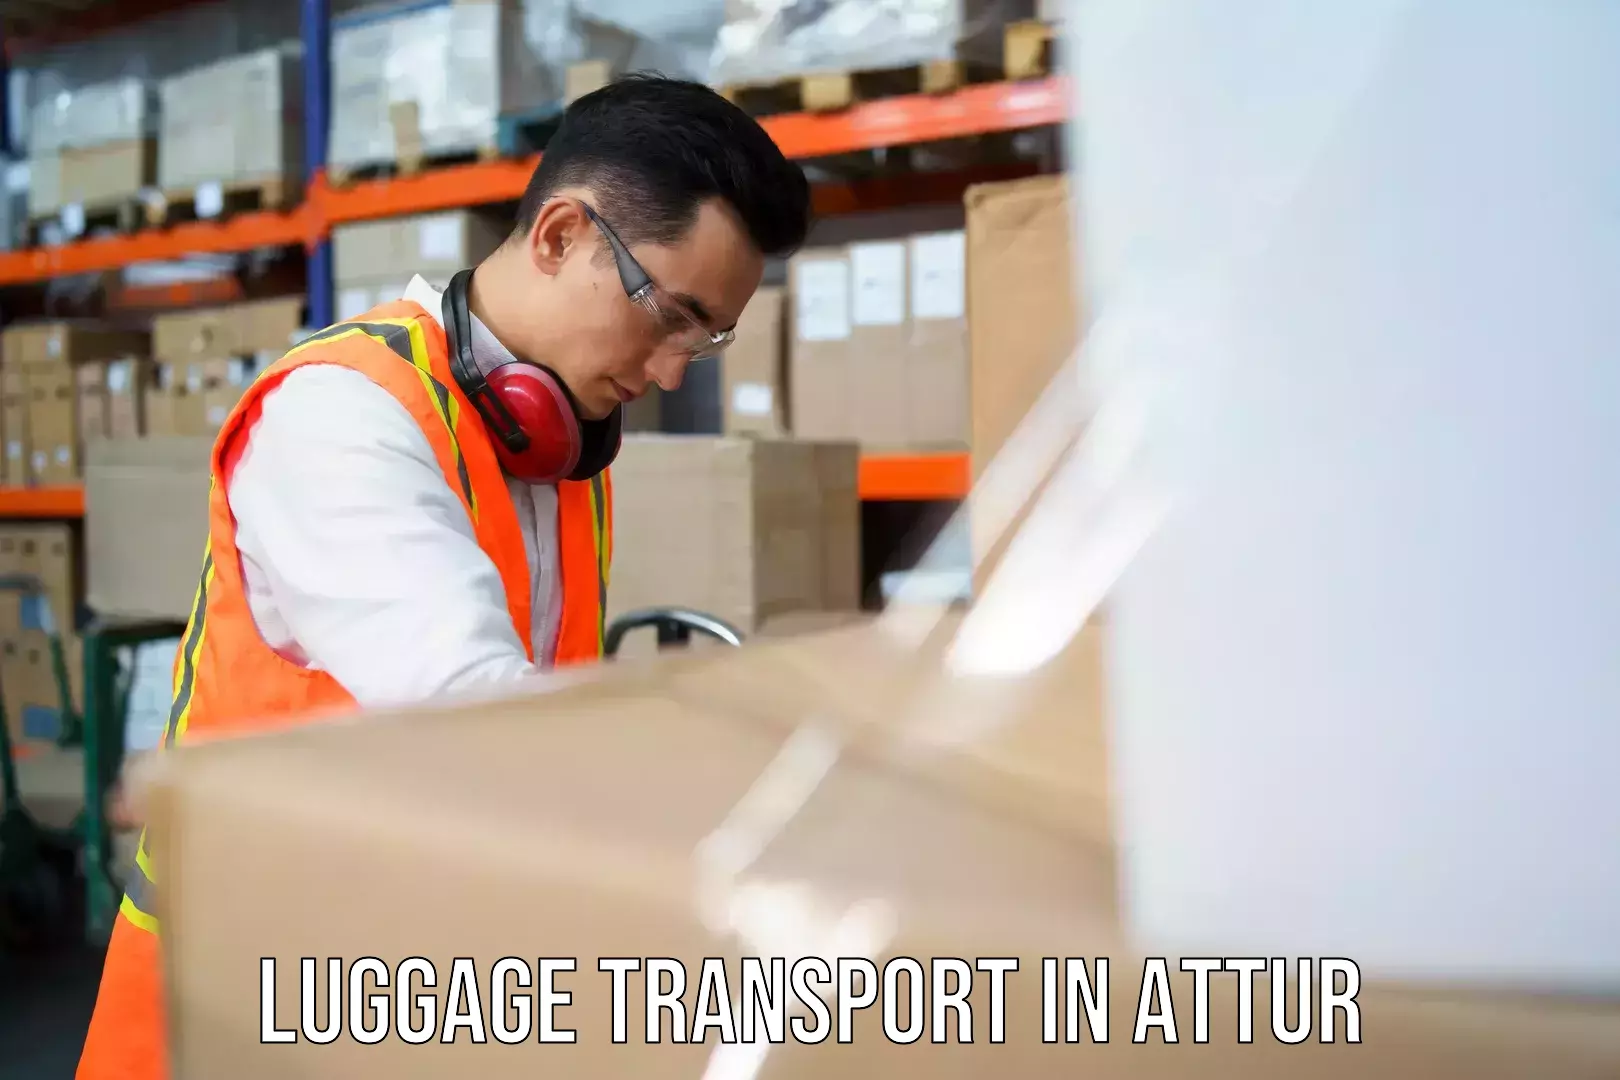 Luggage transport consulting in Attur